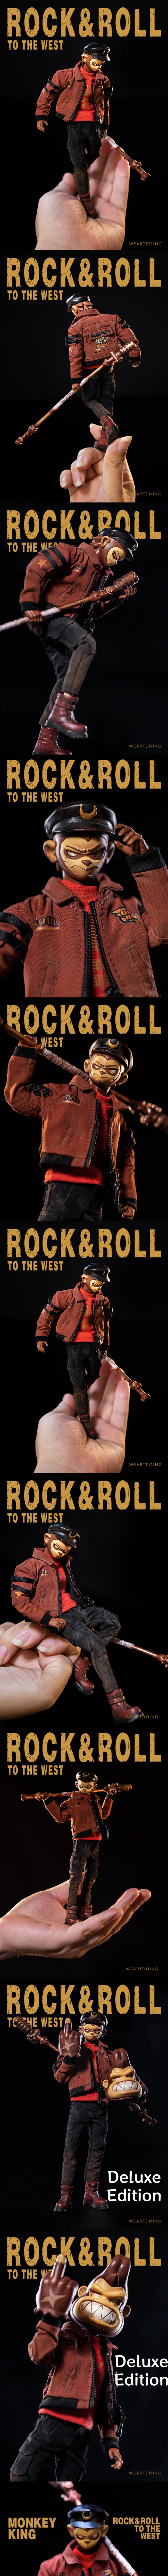 WeArtDoing Rock&Roll to the West Monkey King 1/12 Collectible Action Figurine